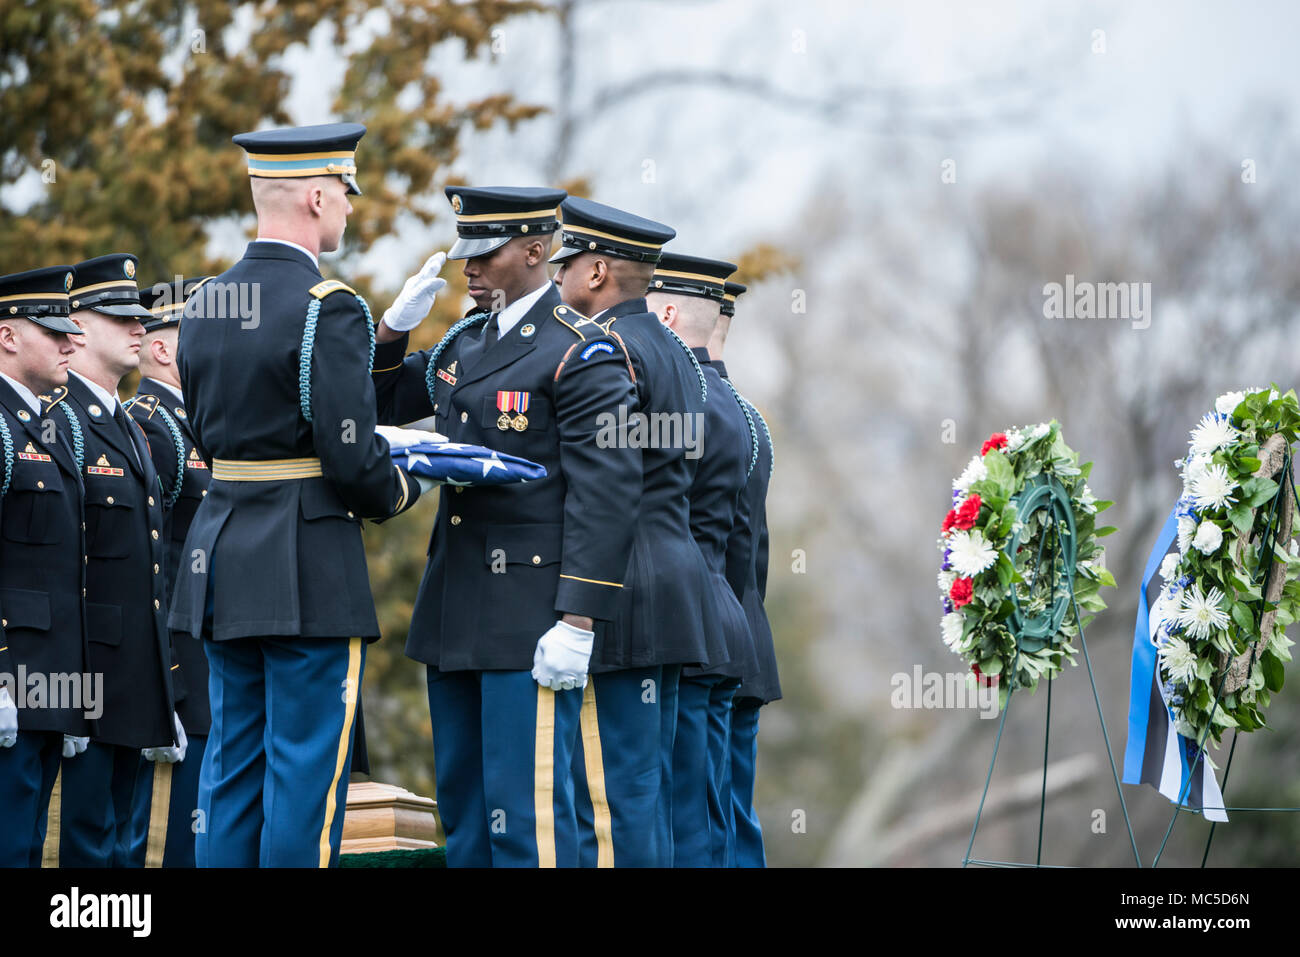 The U.S. Army Honor Guard support the full honors funeral of U.S. Army Col. and Estonian Gen. Aleksander Einseln in Section 34 of Arlington National Cemetery, Arlington, Virginia, April 2, 2018.  Born in Estonia, Einseln immigrated to the United States in 1949 and enrolled in the U.S. Army in 1950 at the outbreak of the Korean War. He served with Special Forces in the Vietnam War and retiring as a Colonel in 1985. In 1993, Einseln returned to Estonia at the request of Estonian President Lennart Meri to serve as the first commander of the Estonian Defence Forces, holding this post until his res Stock Photo